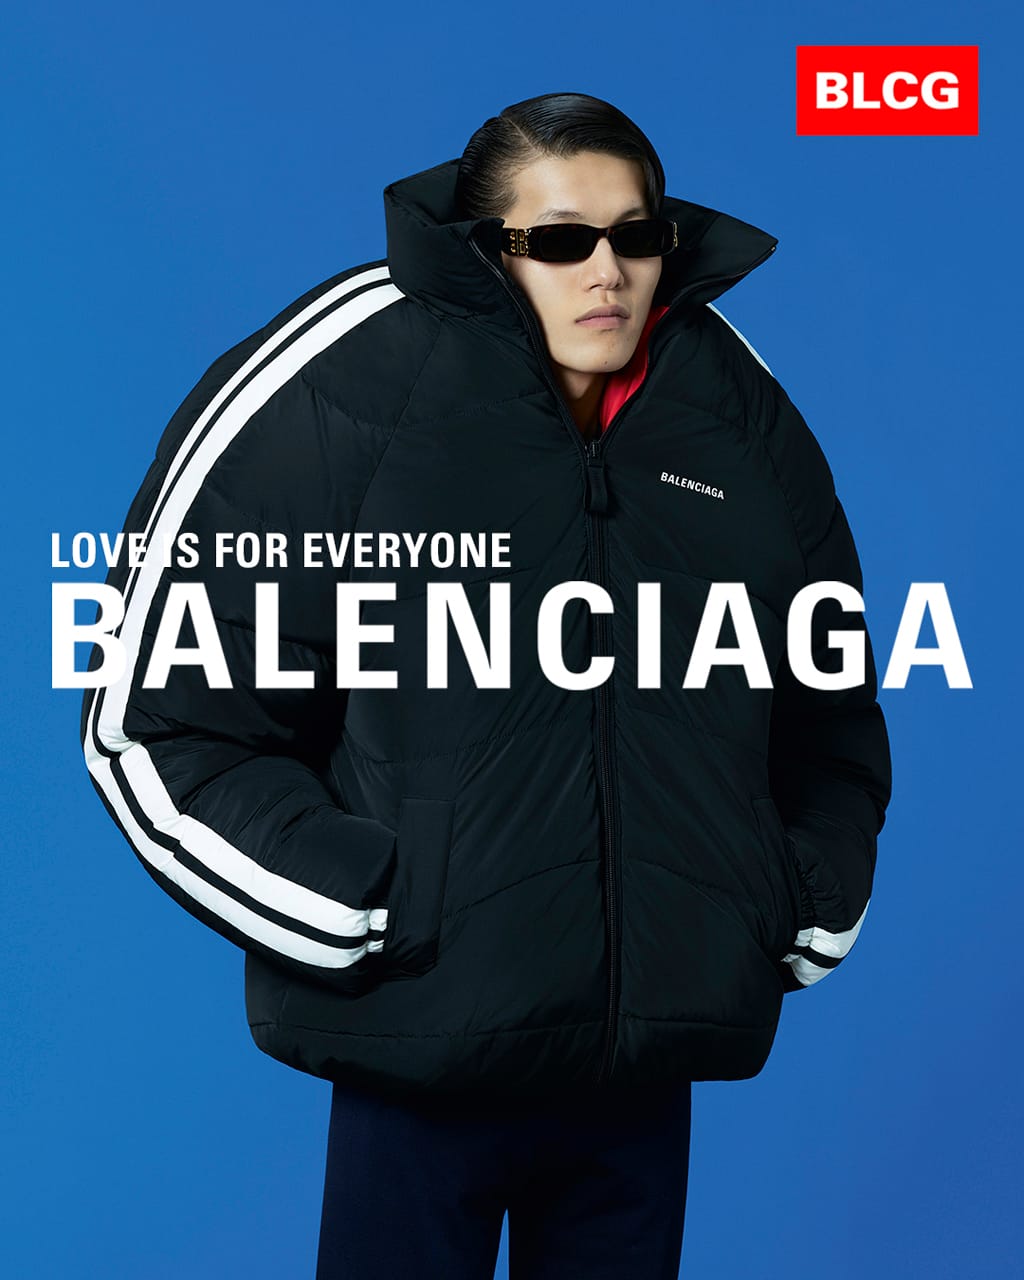 Balenciaga ads are a symptom of a deadly disease attacking our kids  Fox  News